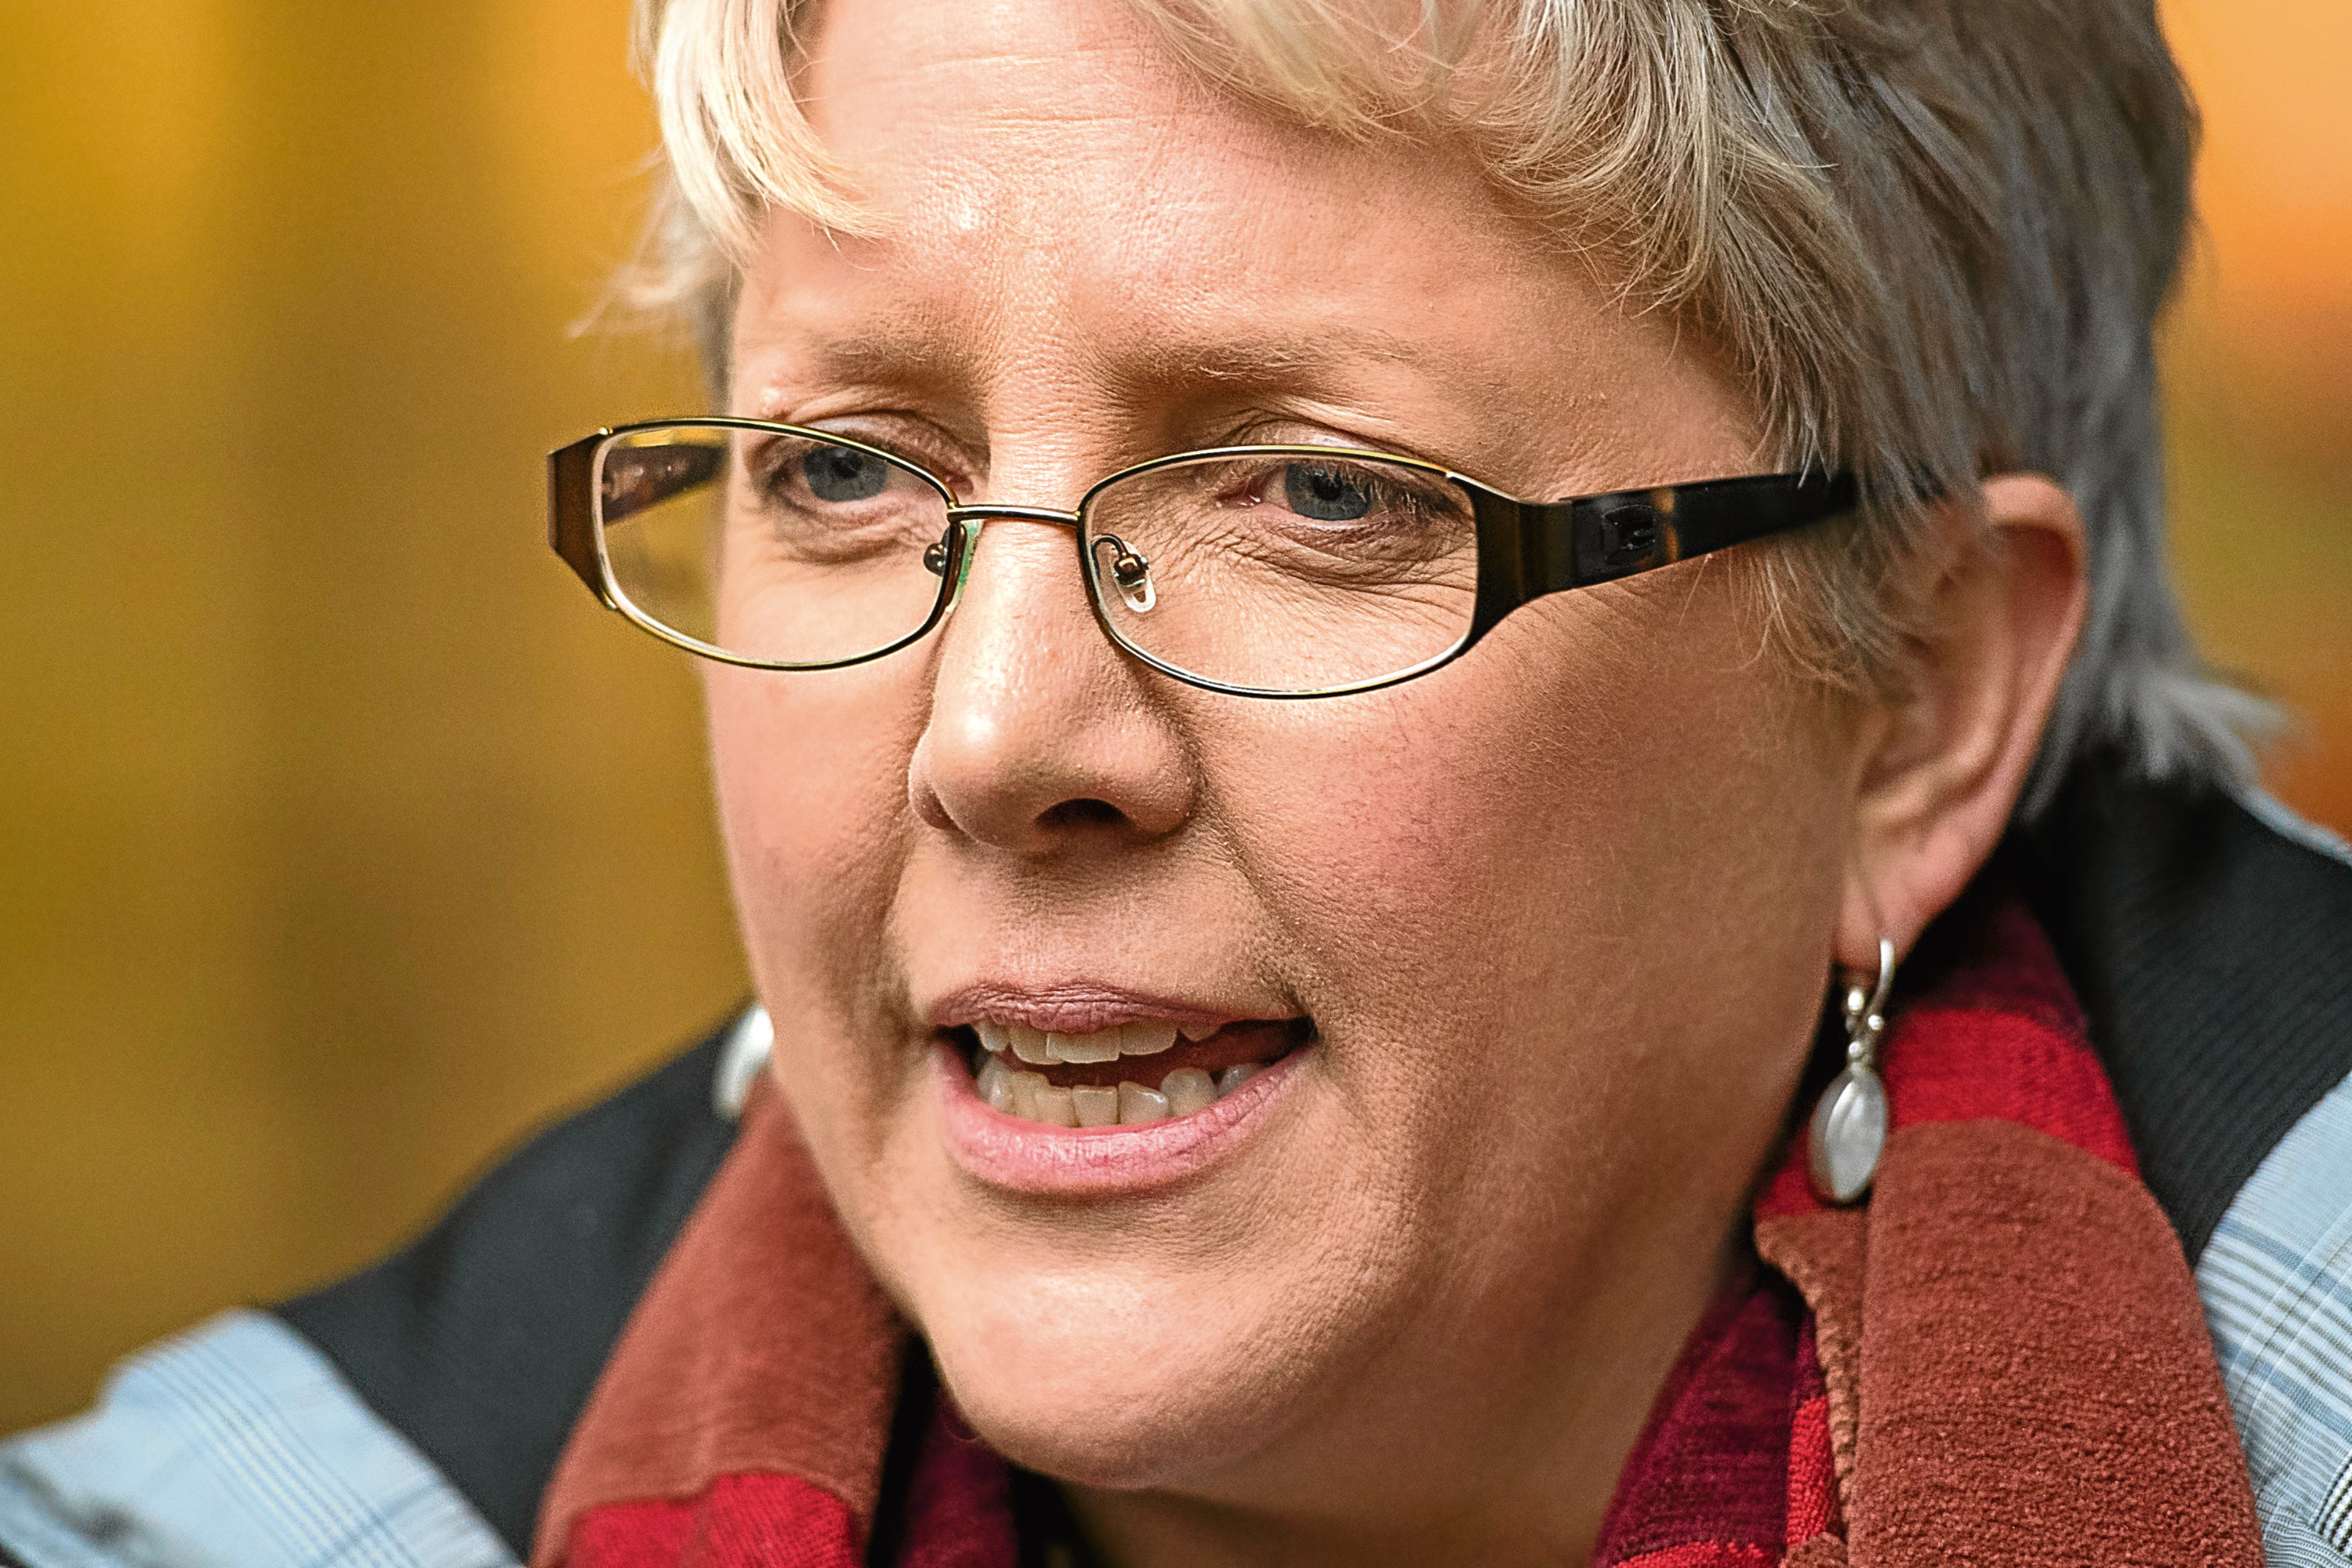 Journalist Carrie Gracie speaks to the media outside BBC Broadcasting House in London after she turned down a £45,000 rise, describing the offer as a "botched solution" to the problem of unequal pay at the BBC.